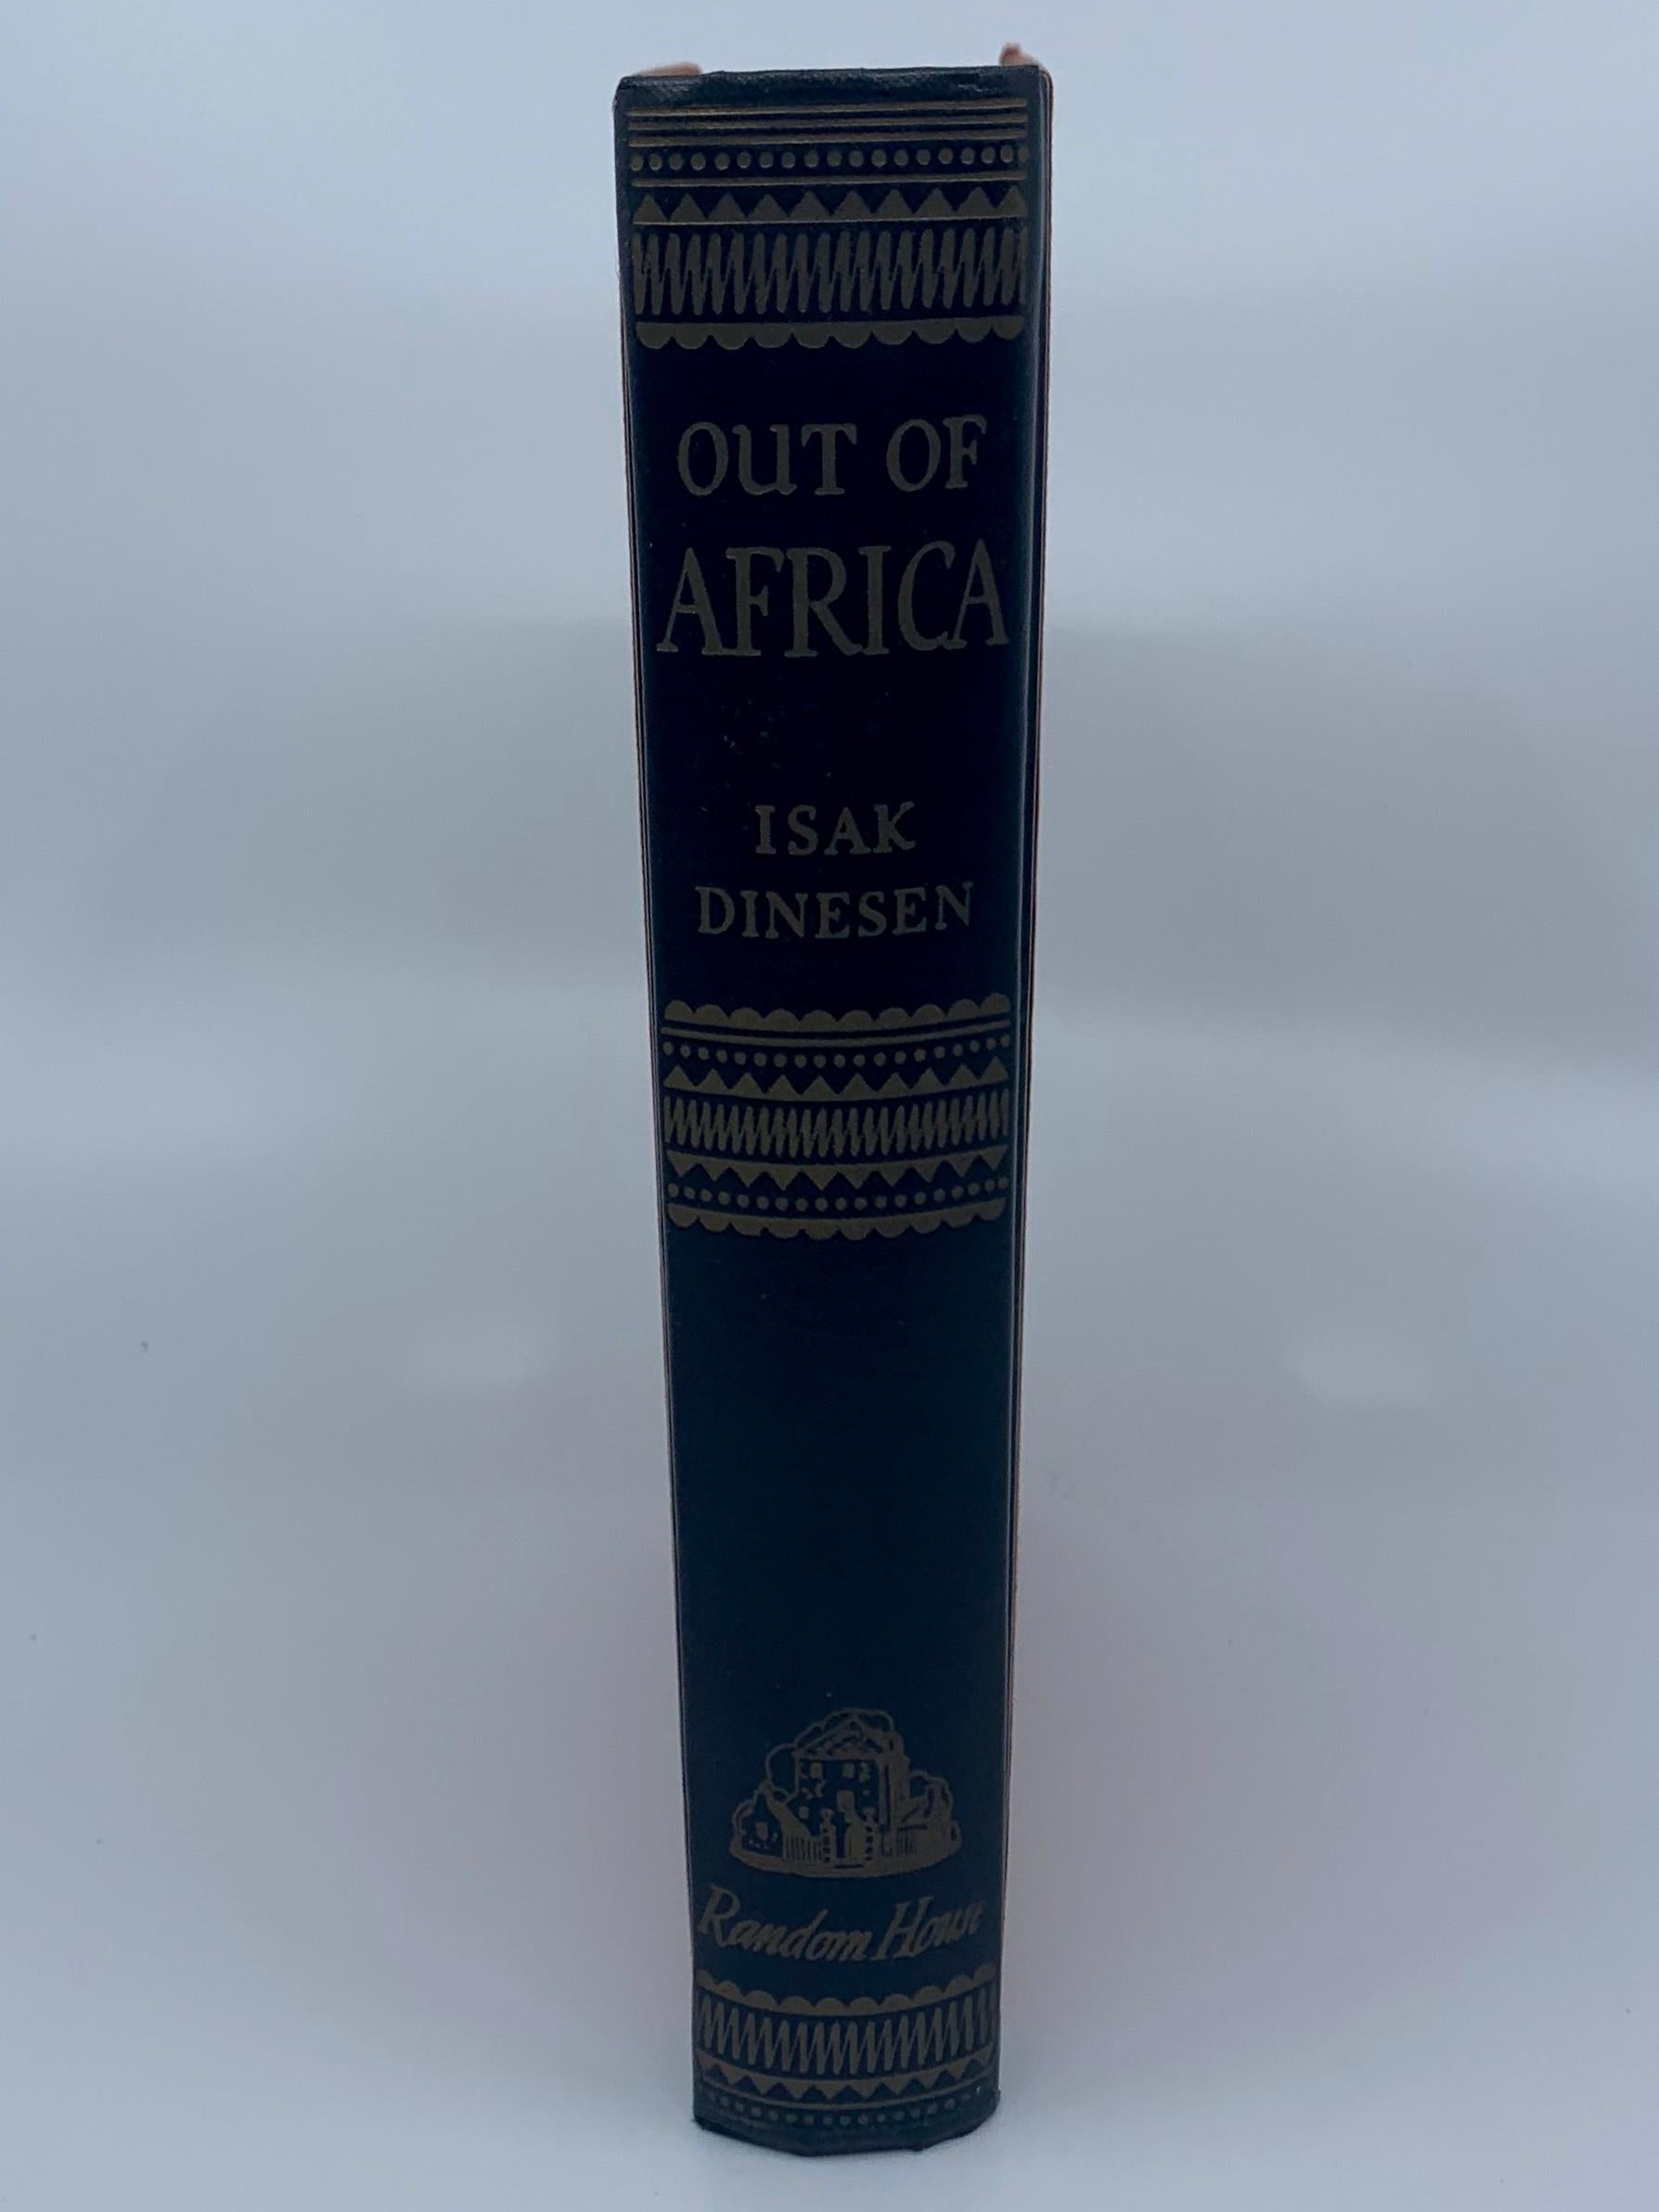 Out of Africa, Isak Dinesen, First Edition 1